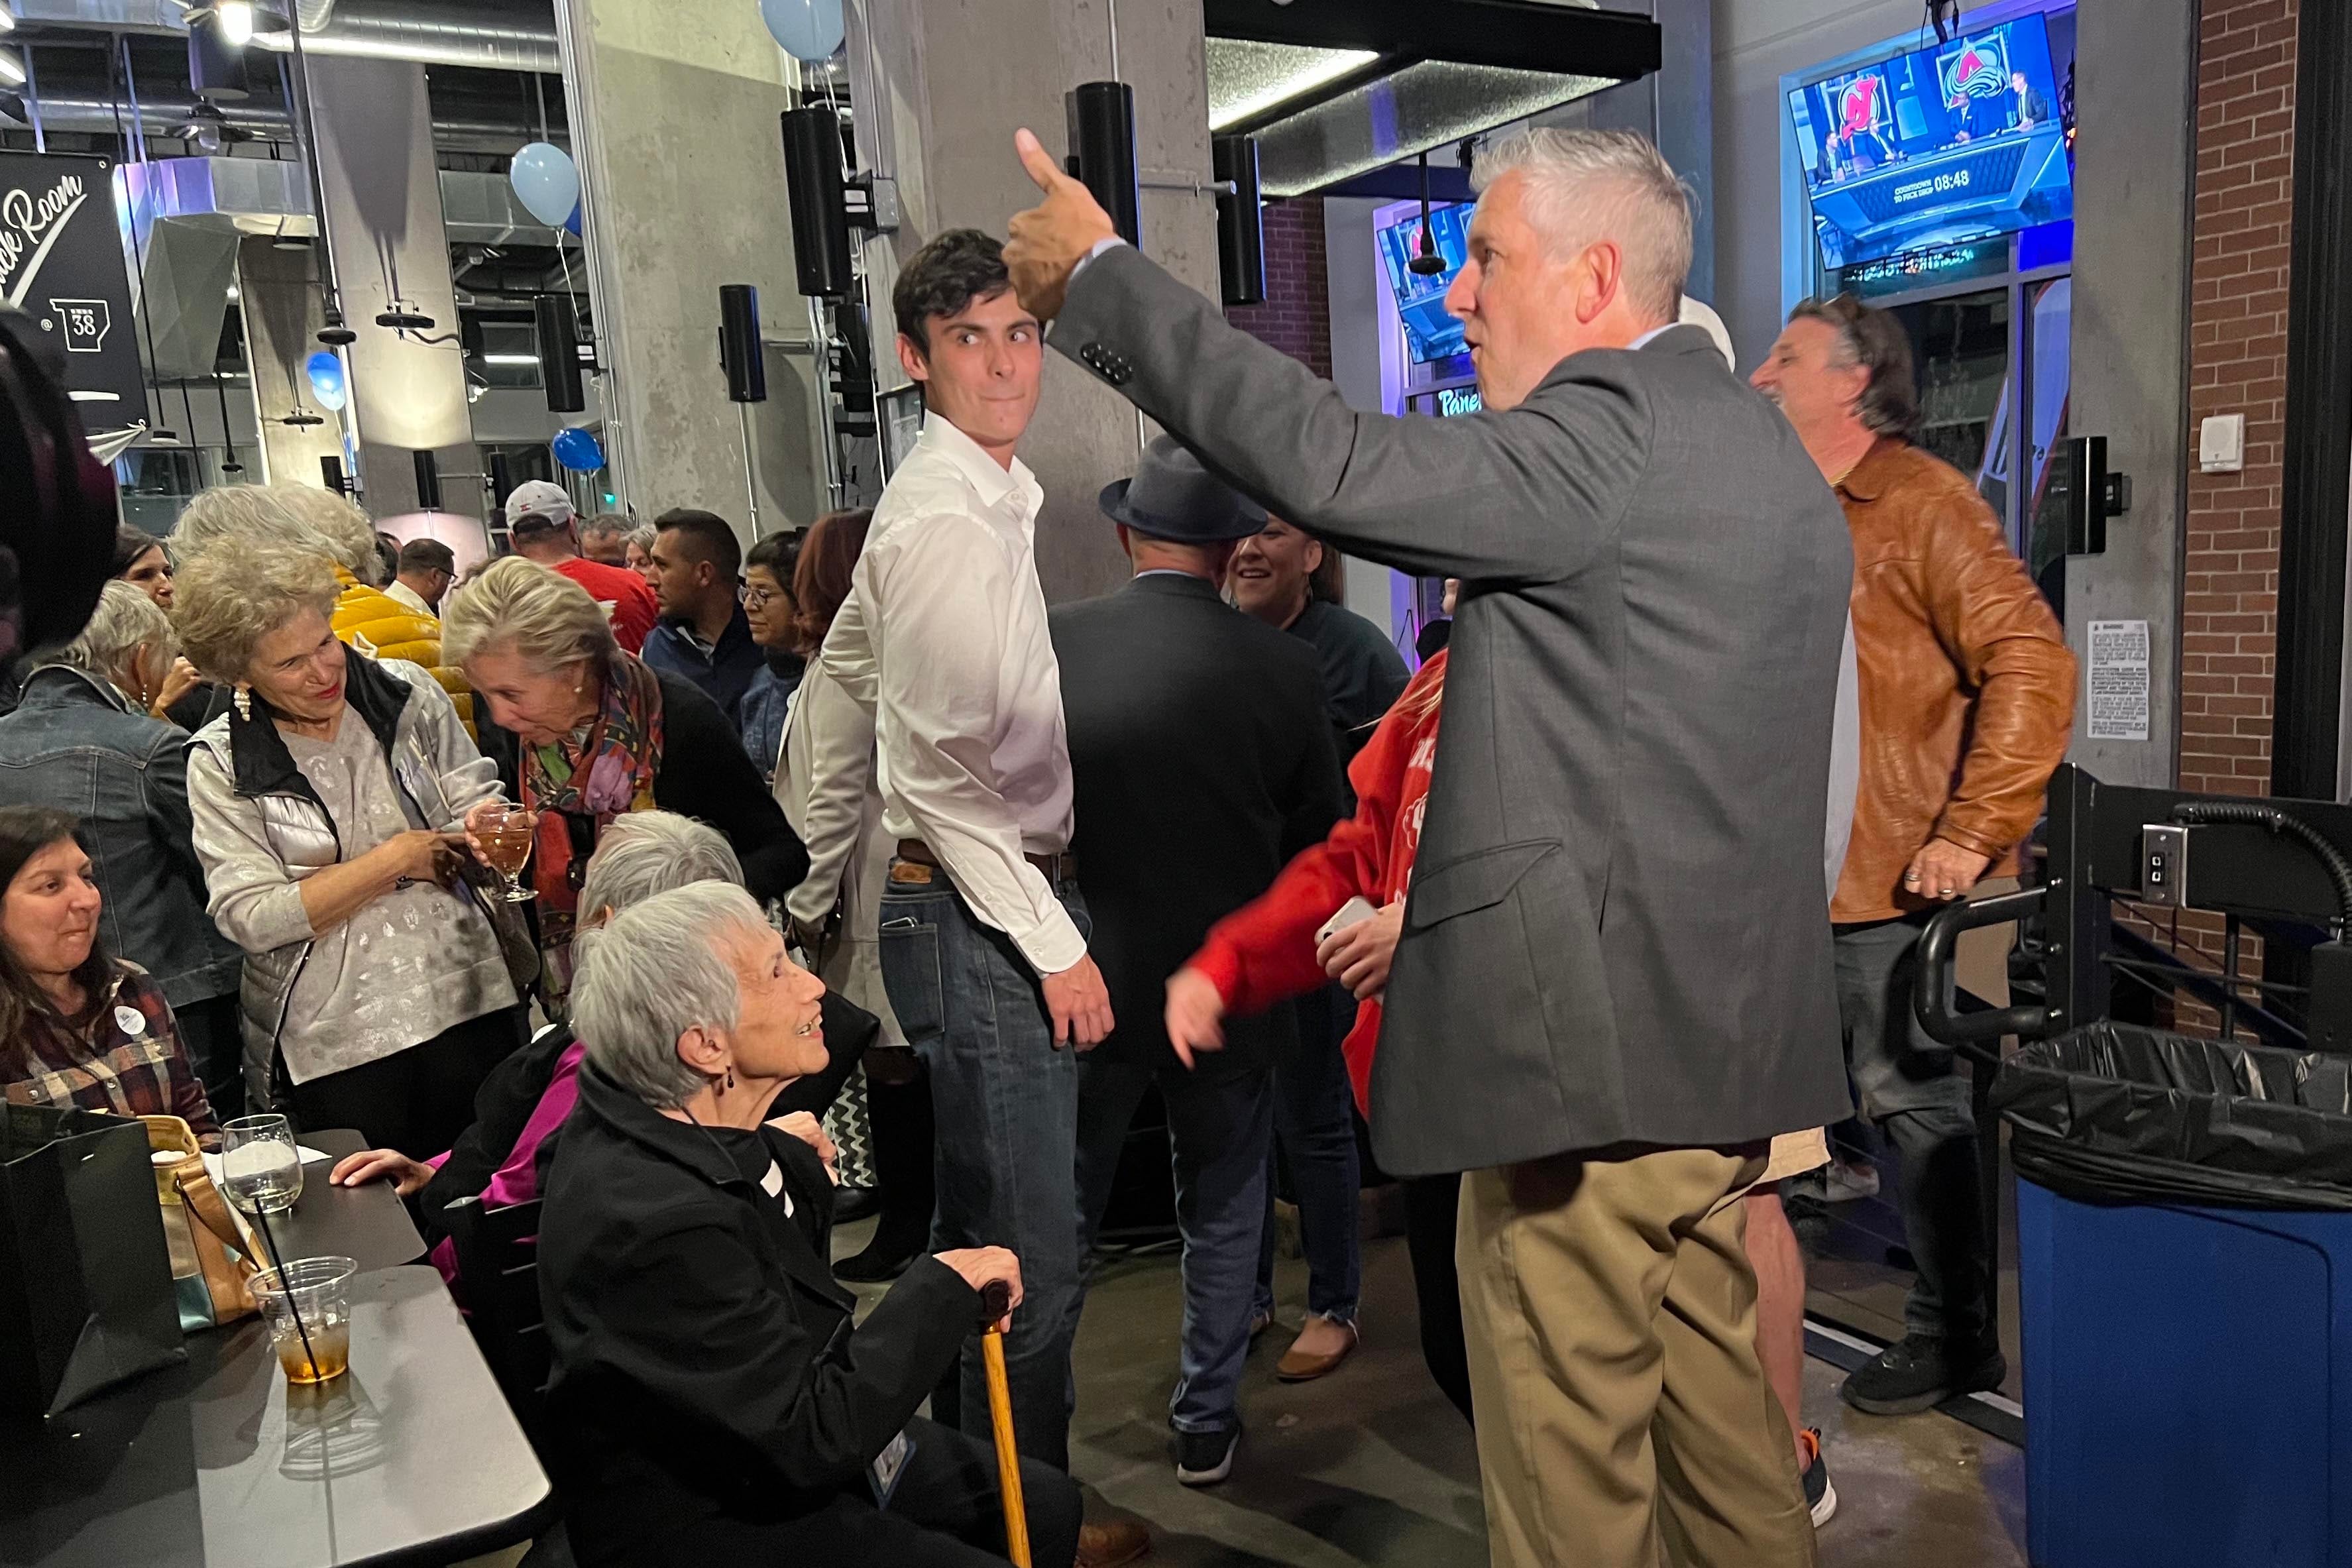 A man with white hair and a grey suit jacket with khaki pants, celebrates after winning an election in a large crowd indoors.